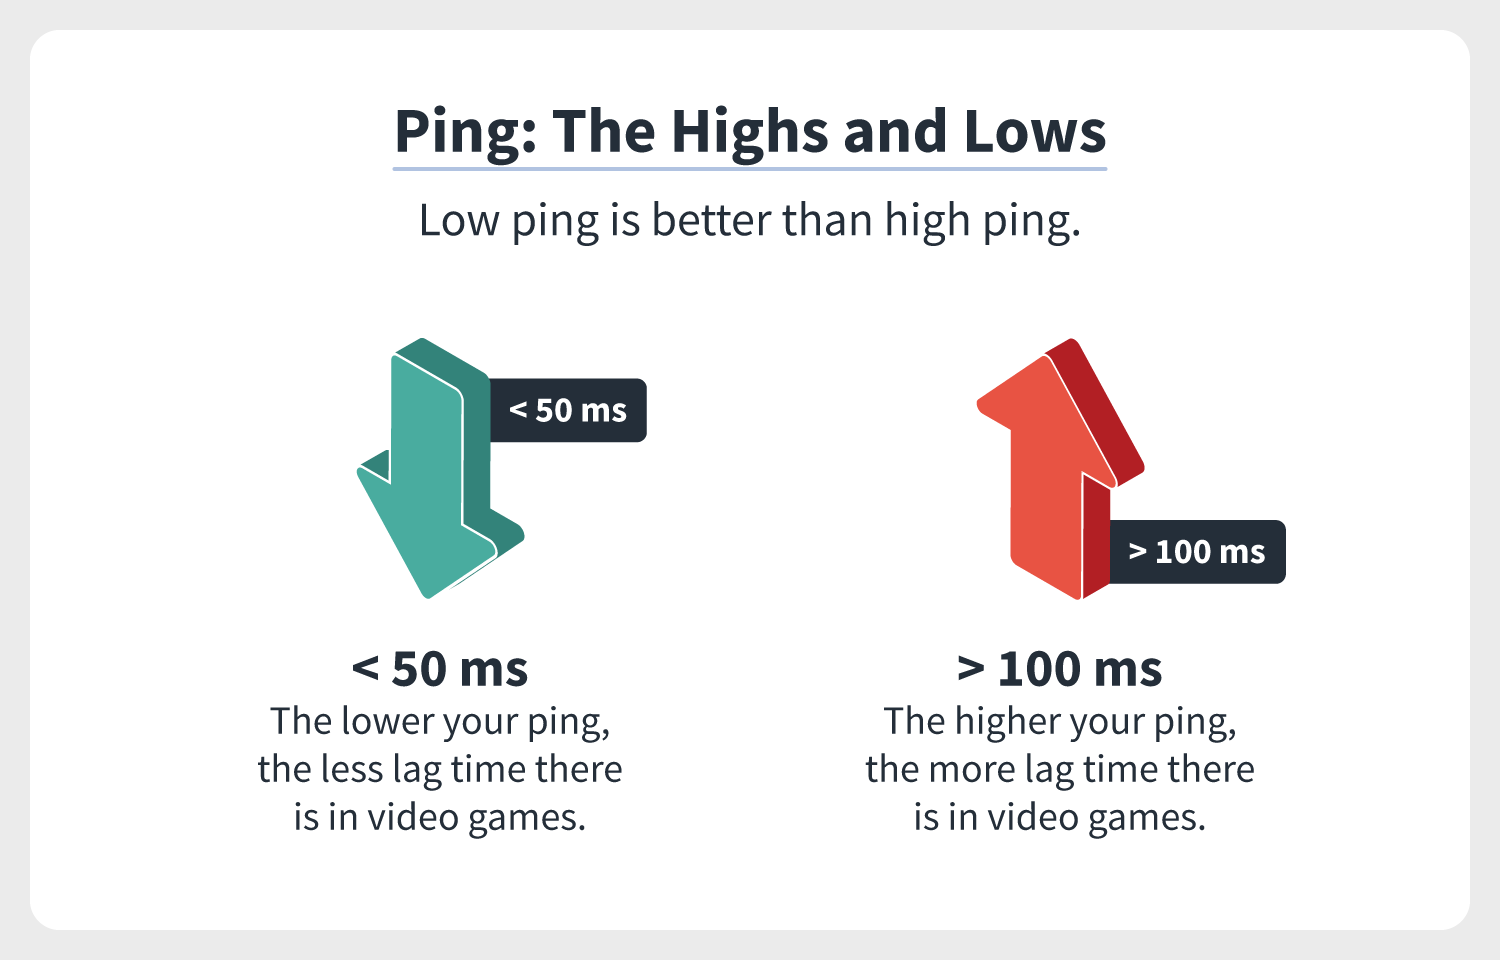 an explanation that low ping is better than high ping and that lower ping means lower lag in video games